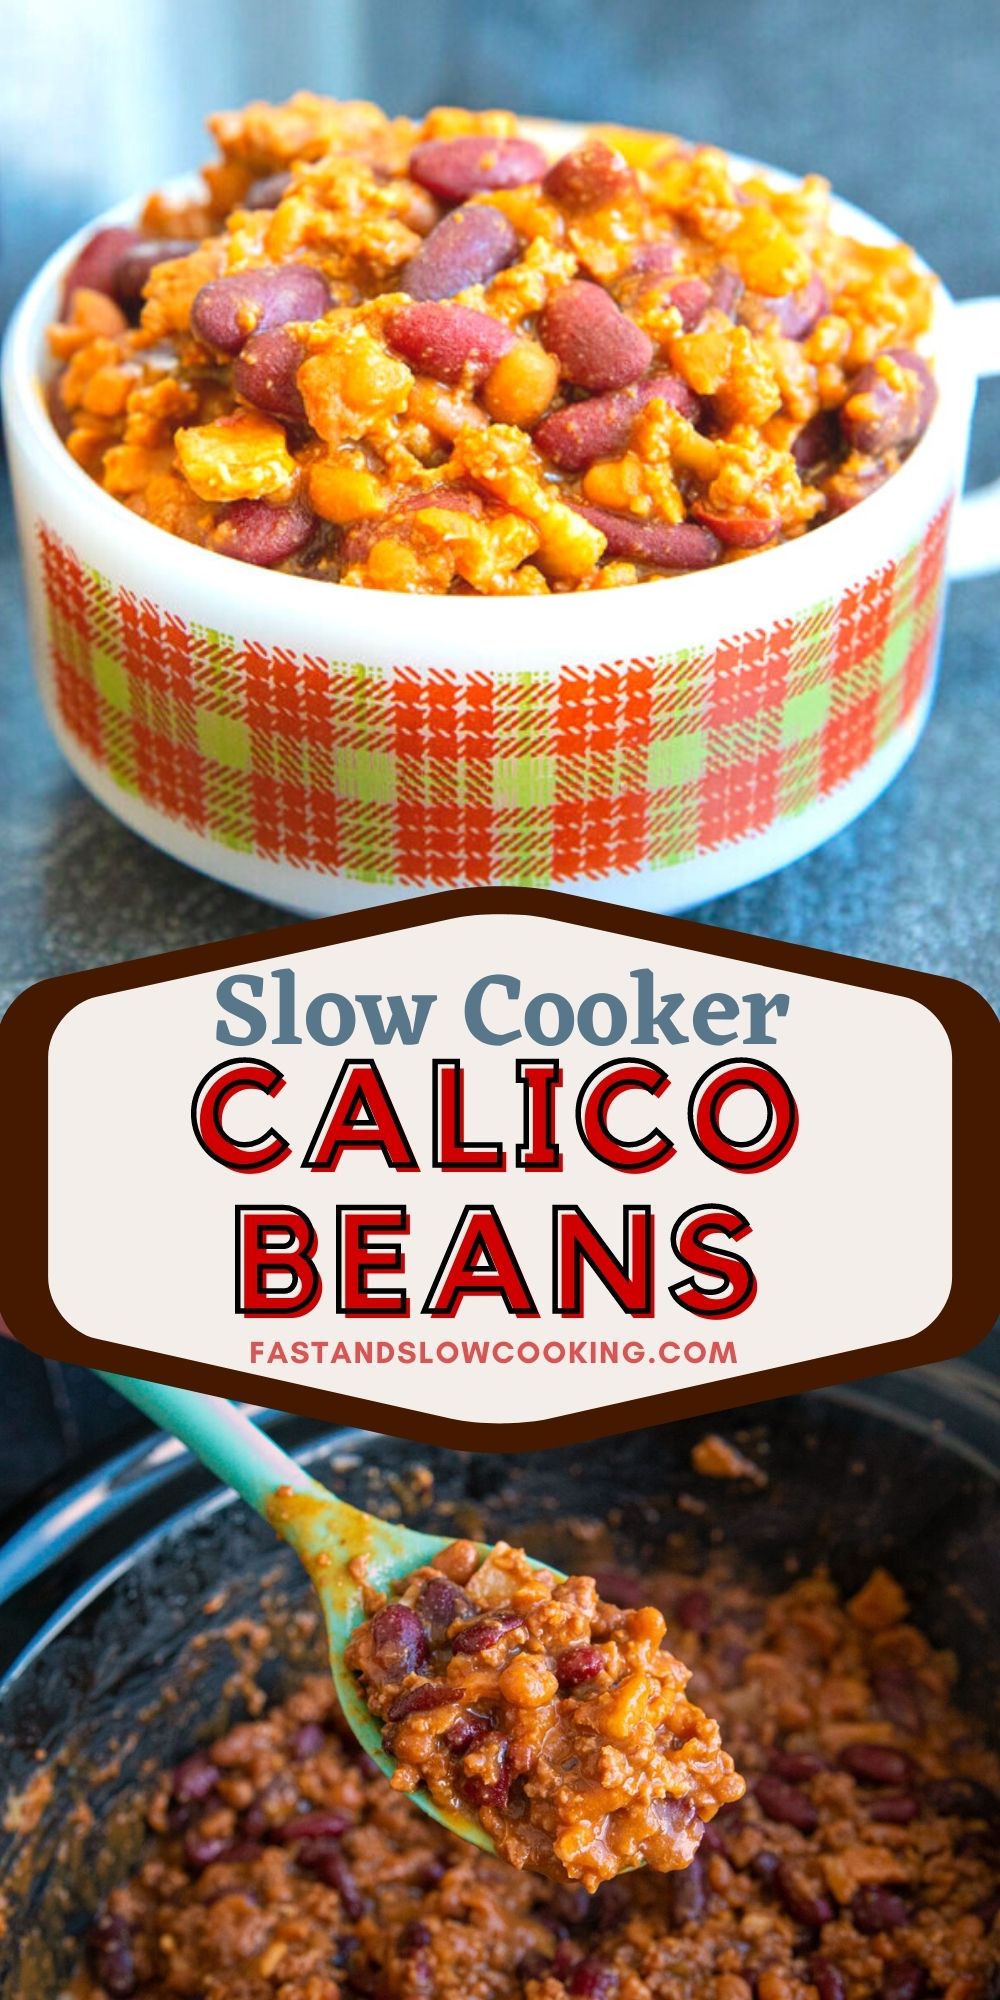 These Slow Cooker Calico Beans are a fast, frugal and delicious dinner that the entire family will love! They can be cooked in the Instant Pot or the oven as well!